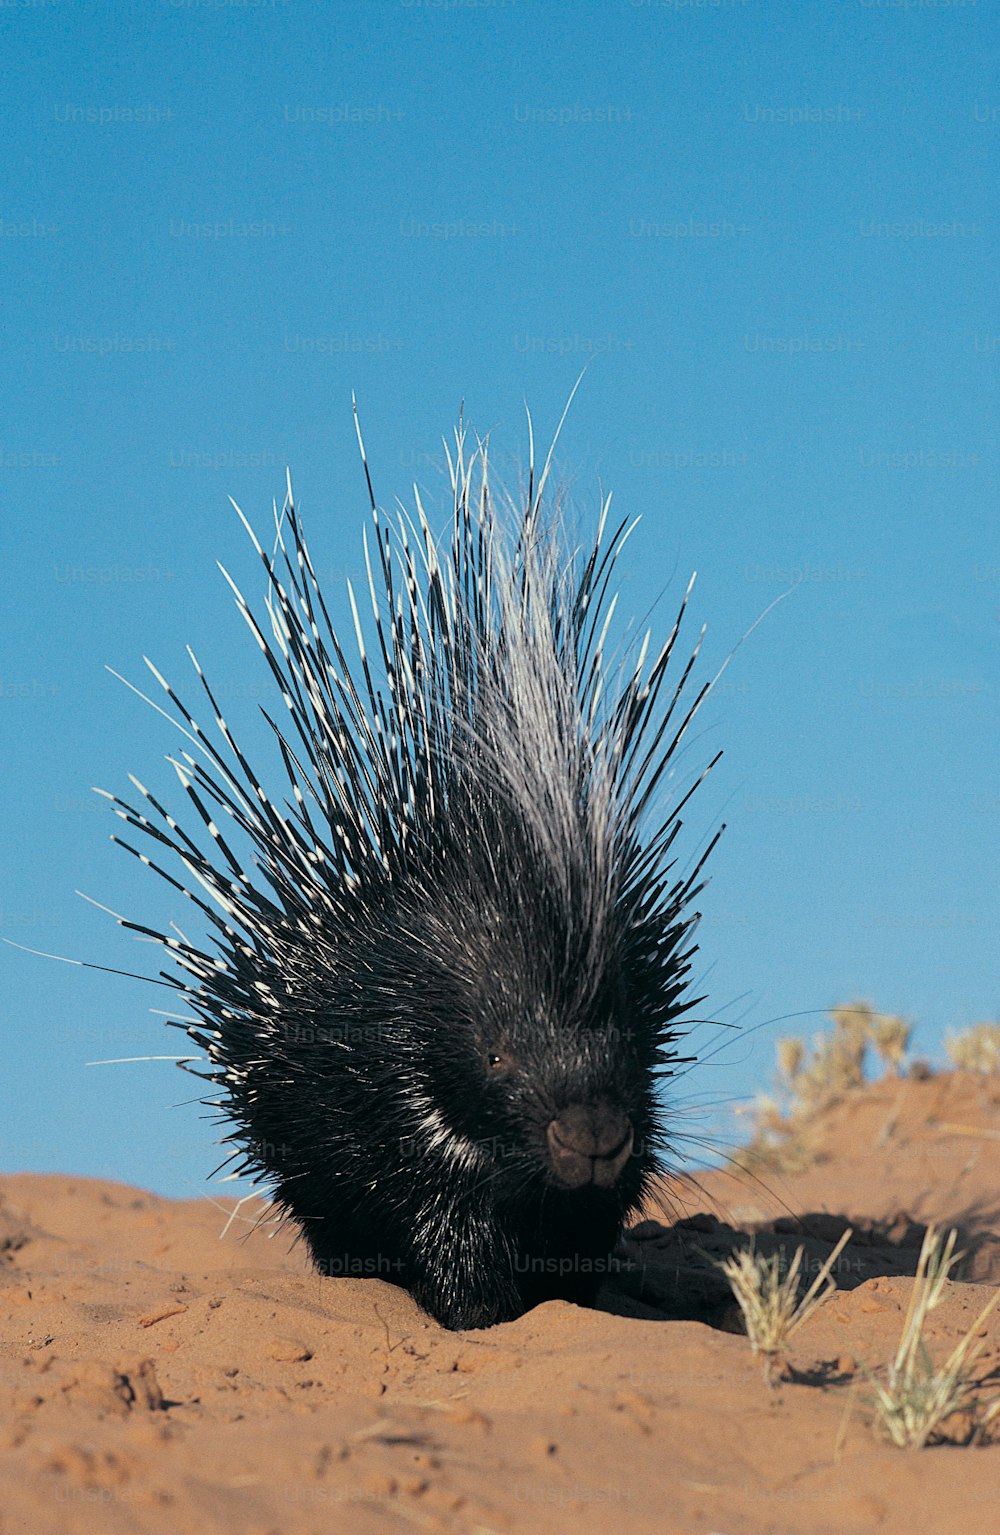 a porcupine walking through the sand in the desert